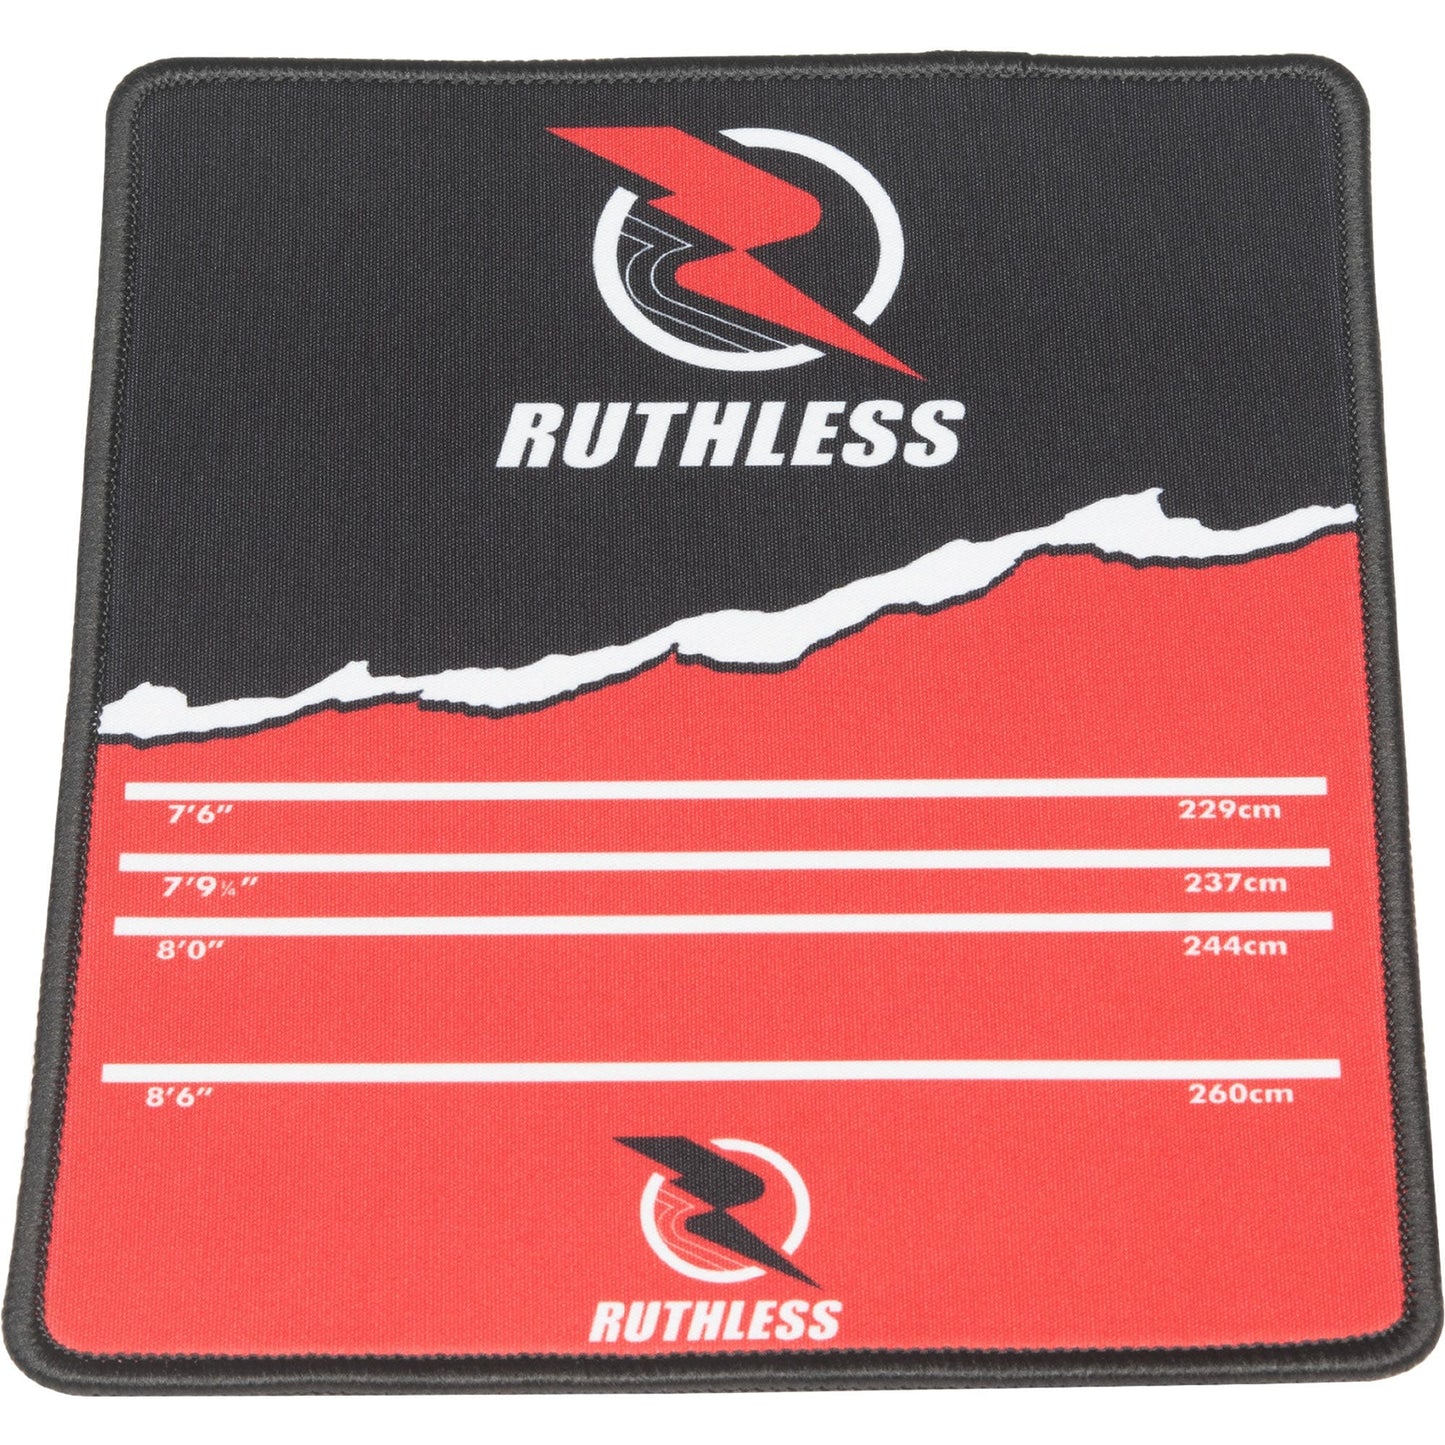 Ruthless Mouse Mat - Throwline Oche Design - 18cm x 22cm - Black and Red